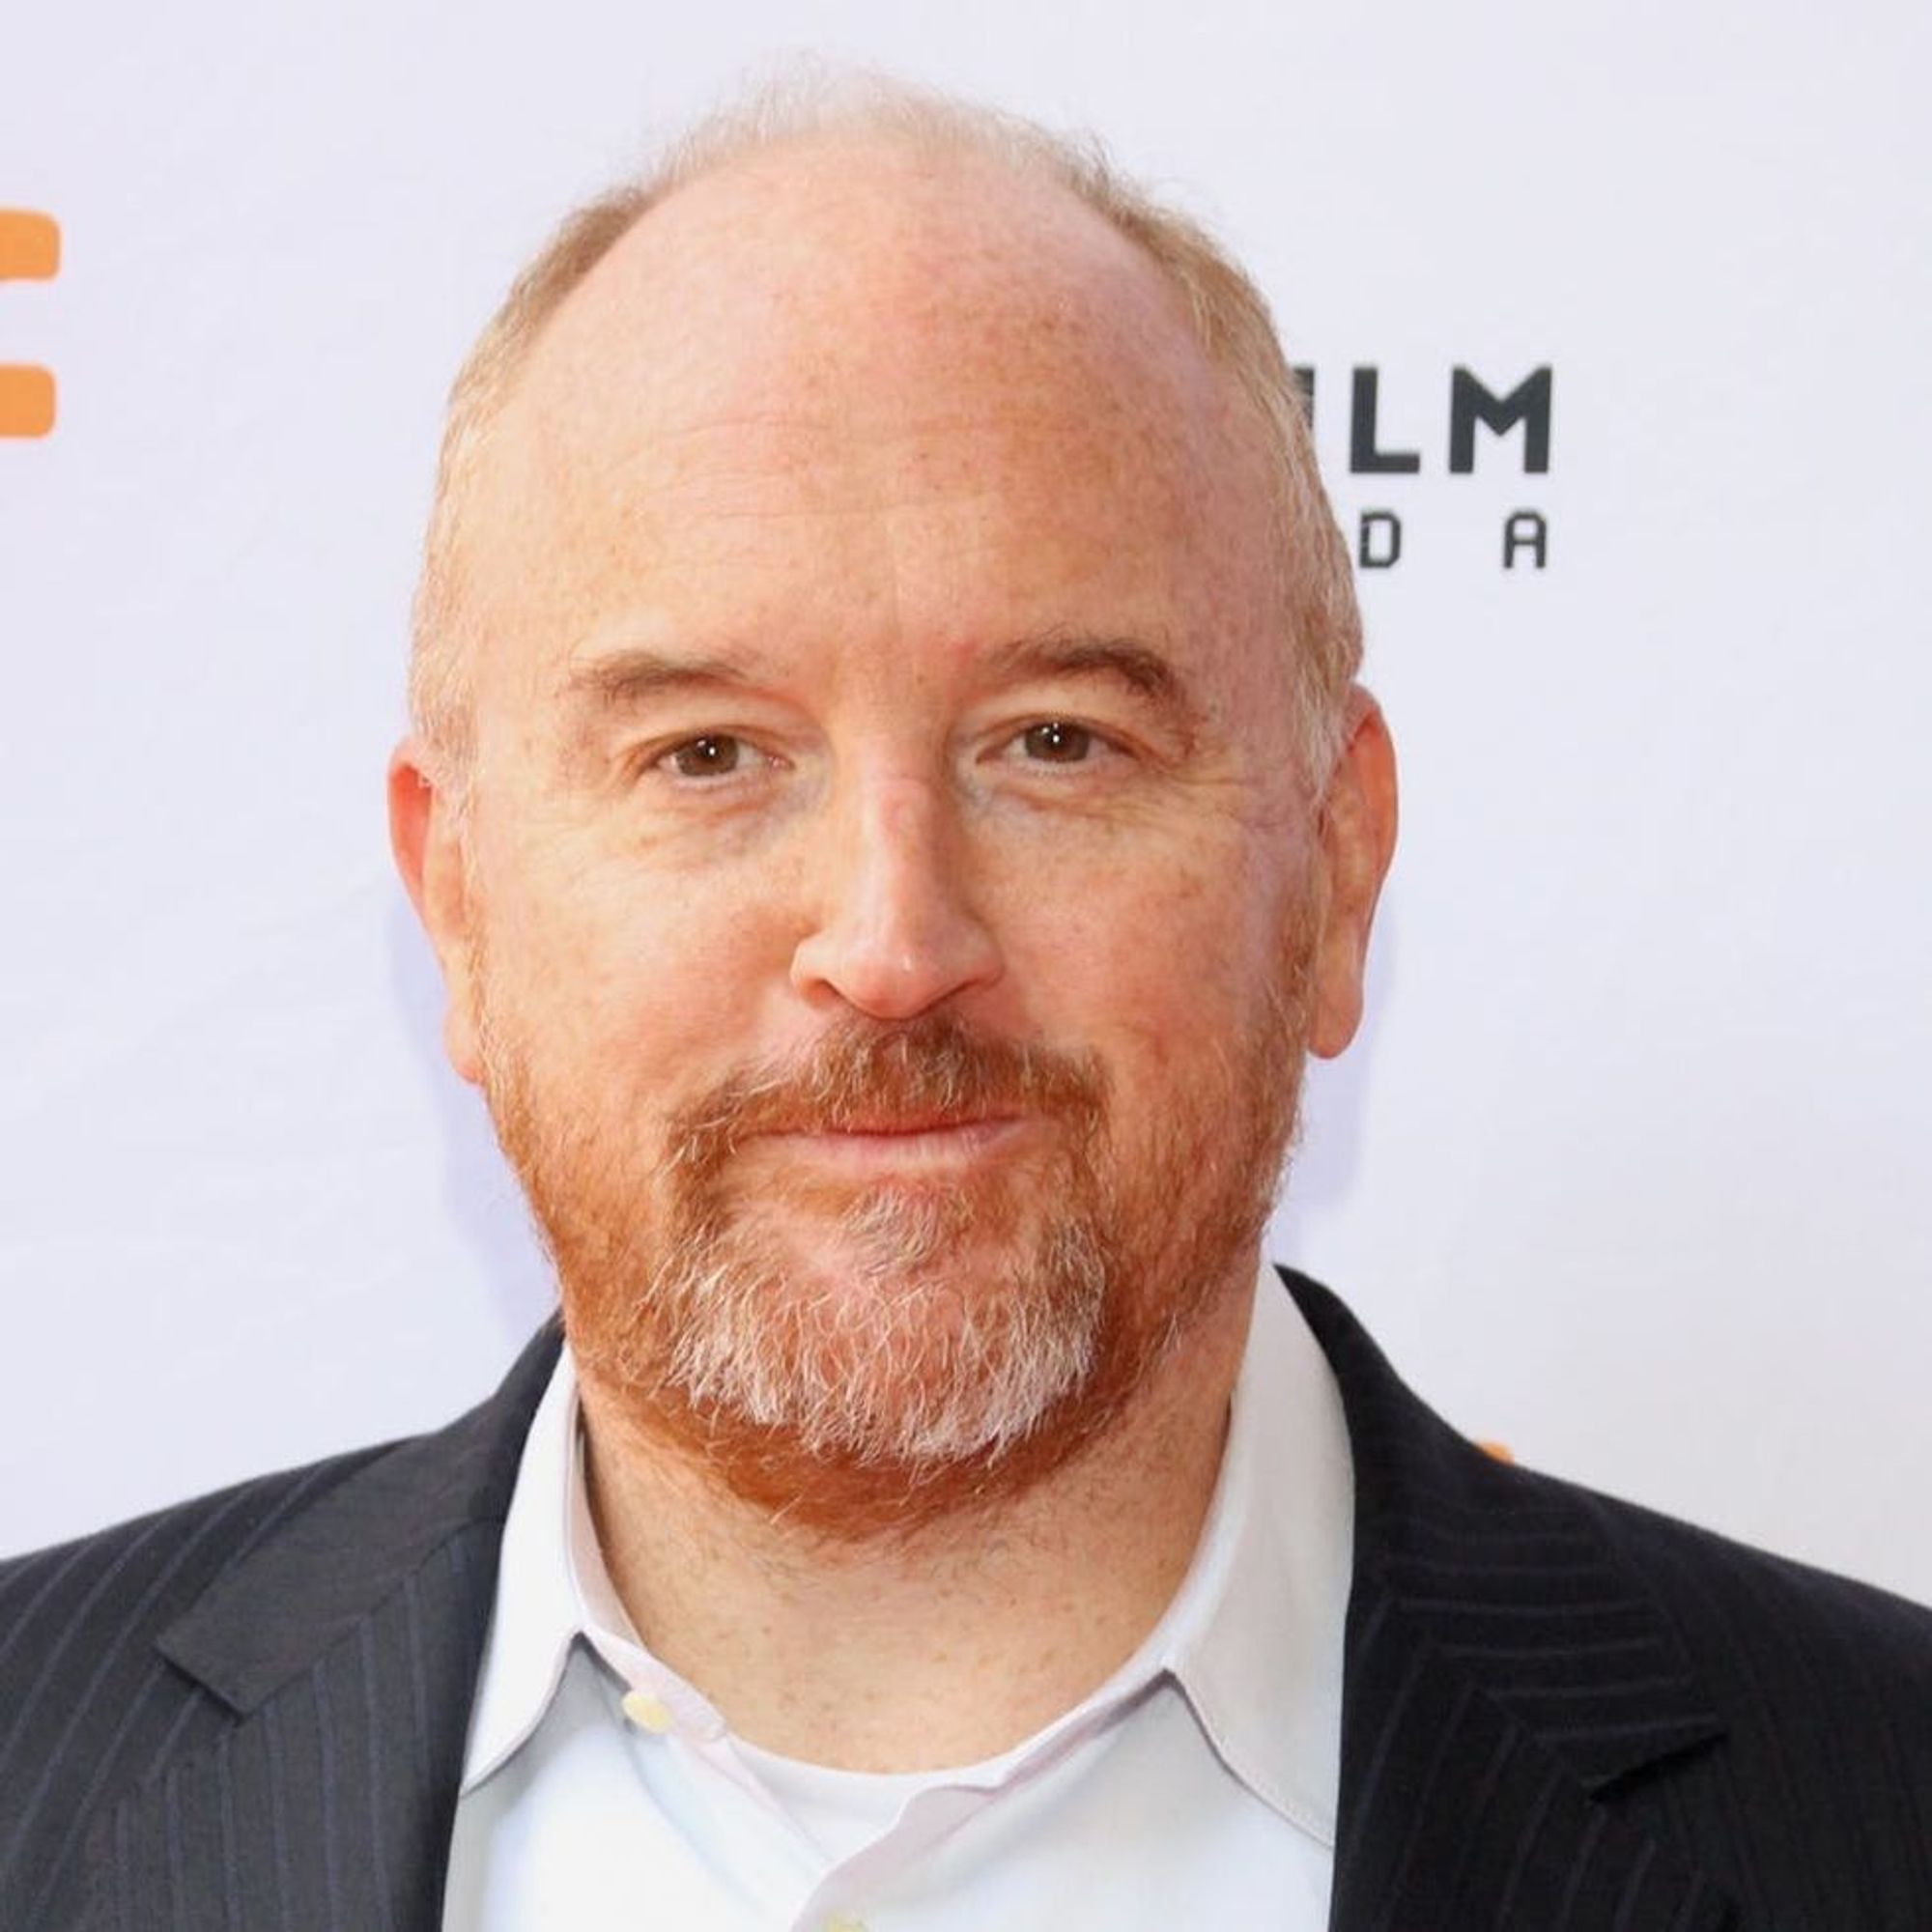 Louis C.K. Responds to Sexual Misconduct Allegations: “These Stories Are True” - Brit + Co